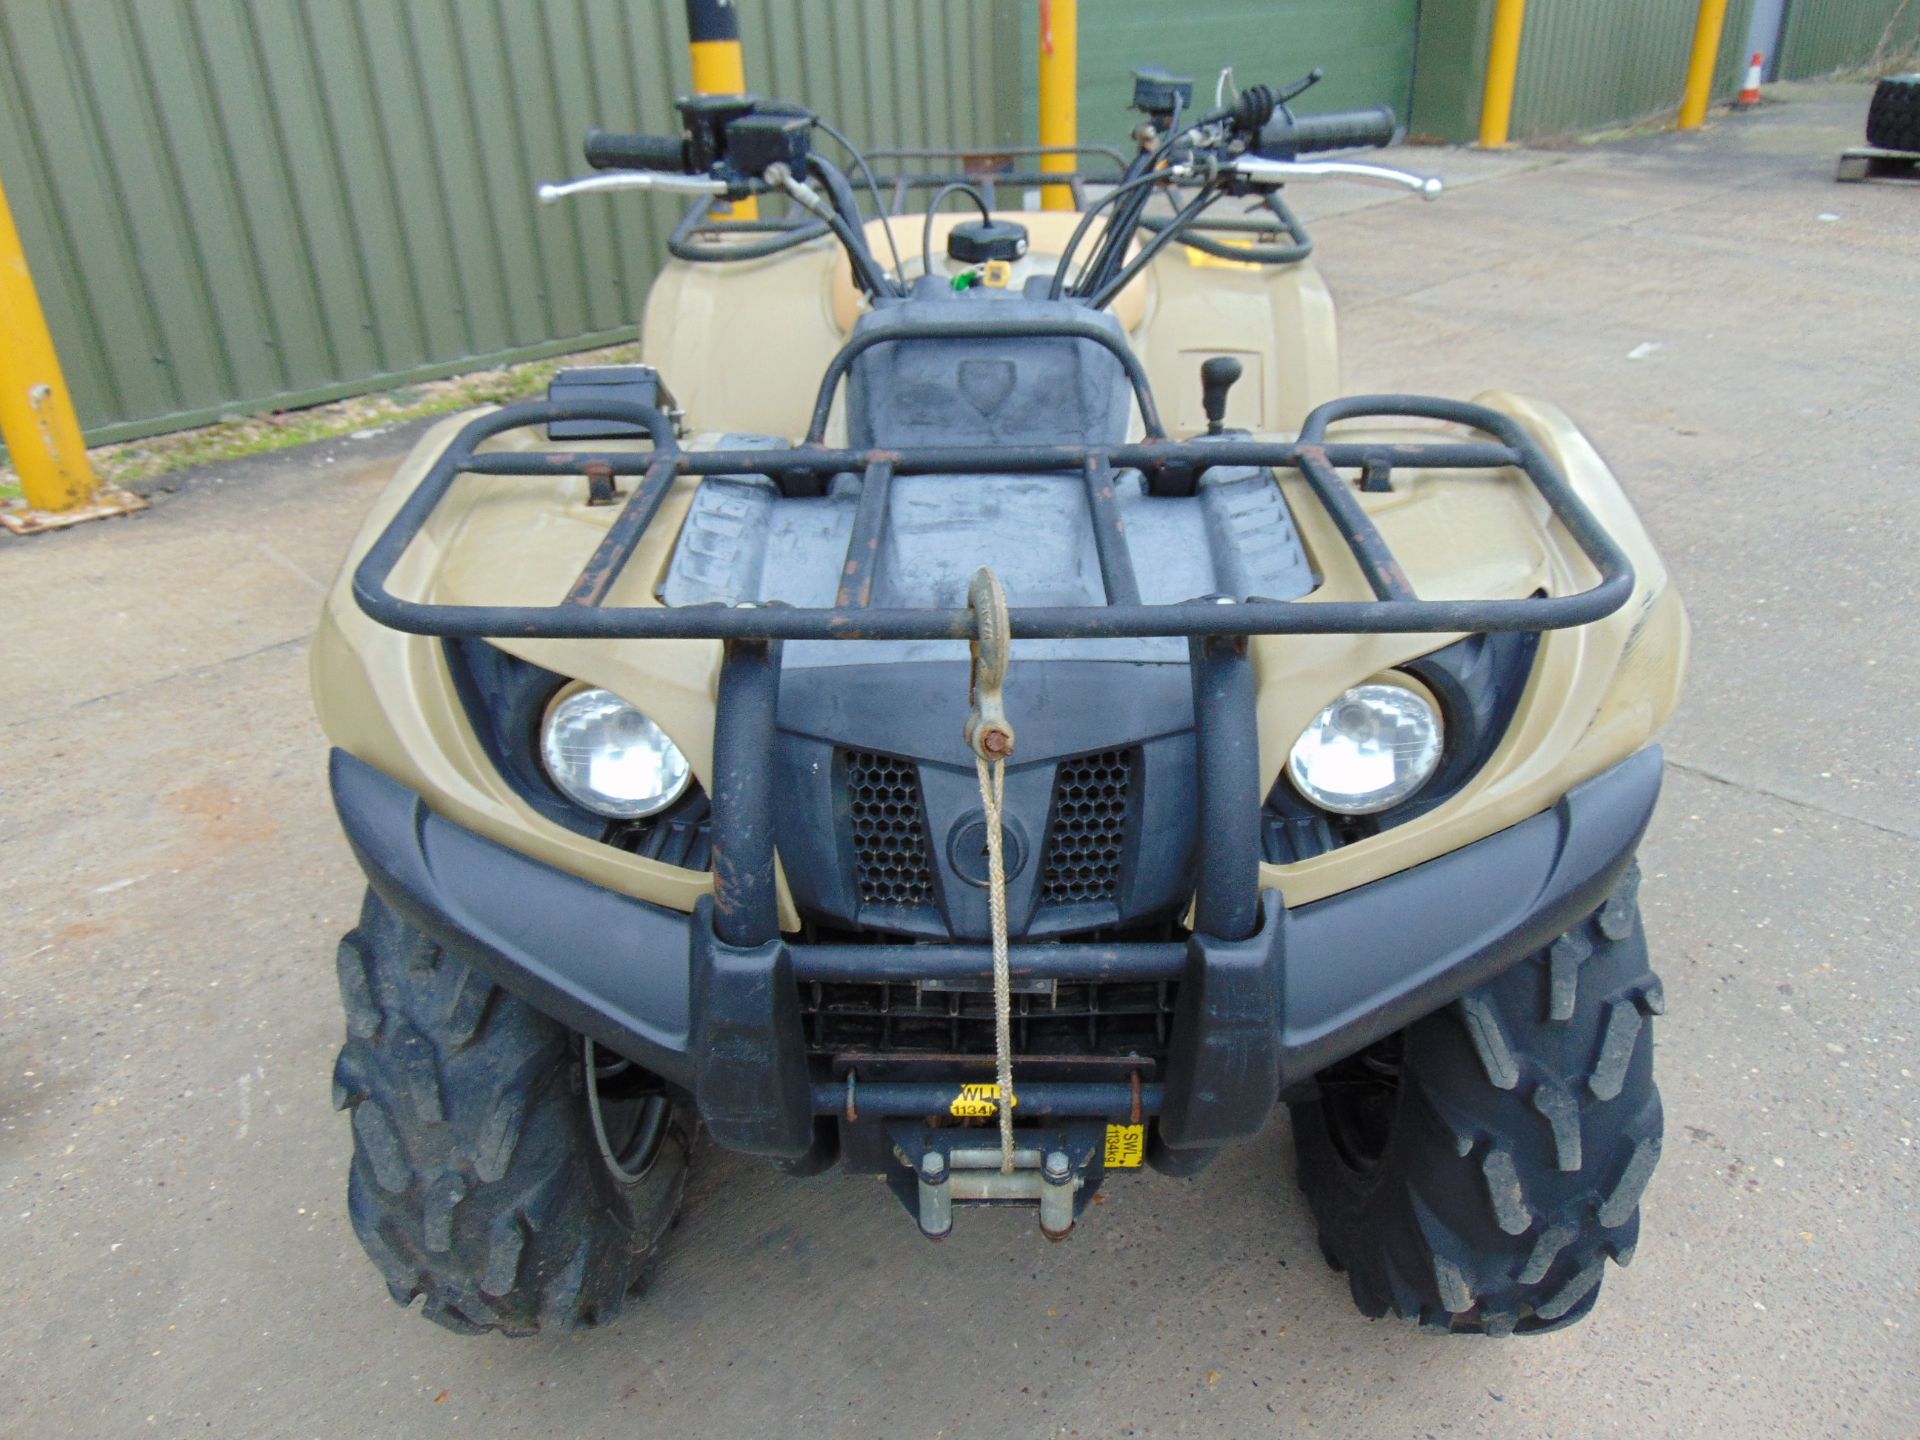 Recent Release Military Specification Yamaha Grizzly 450 4 x 4 ATV Quad Bike ONLY 59 HOURS!!! - Image 3 of 20